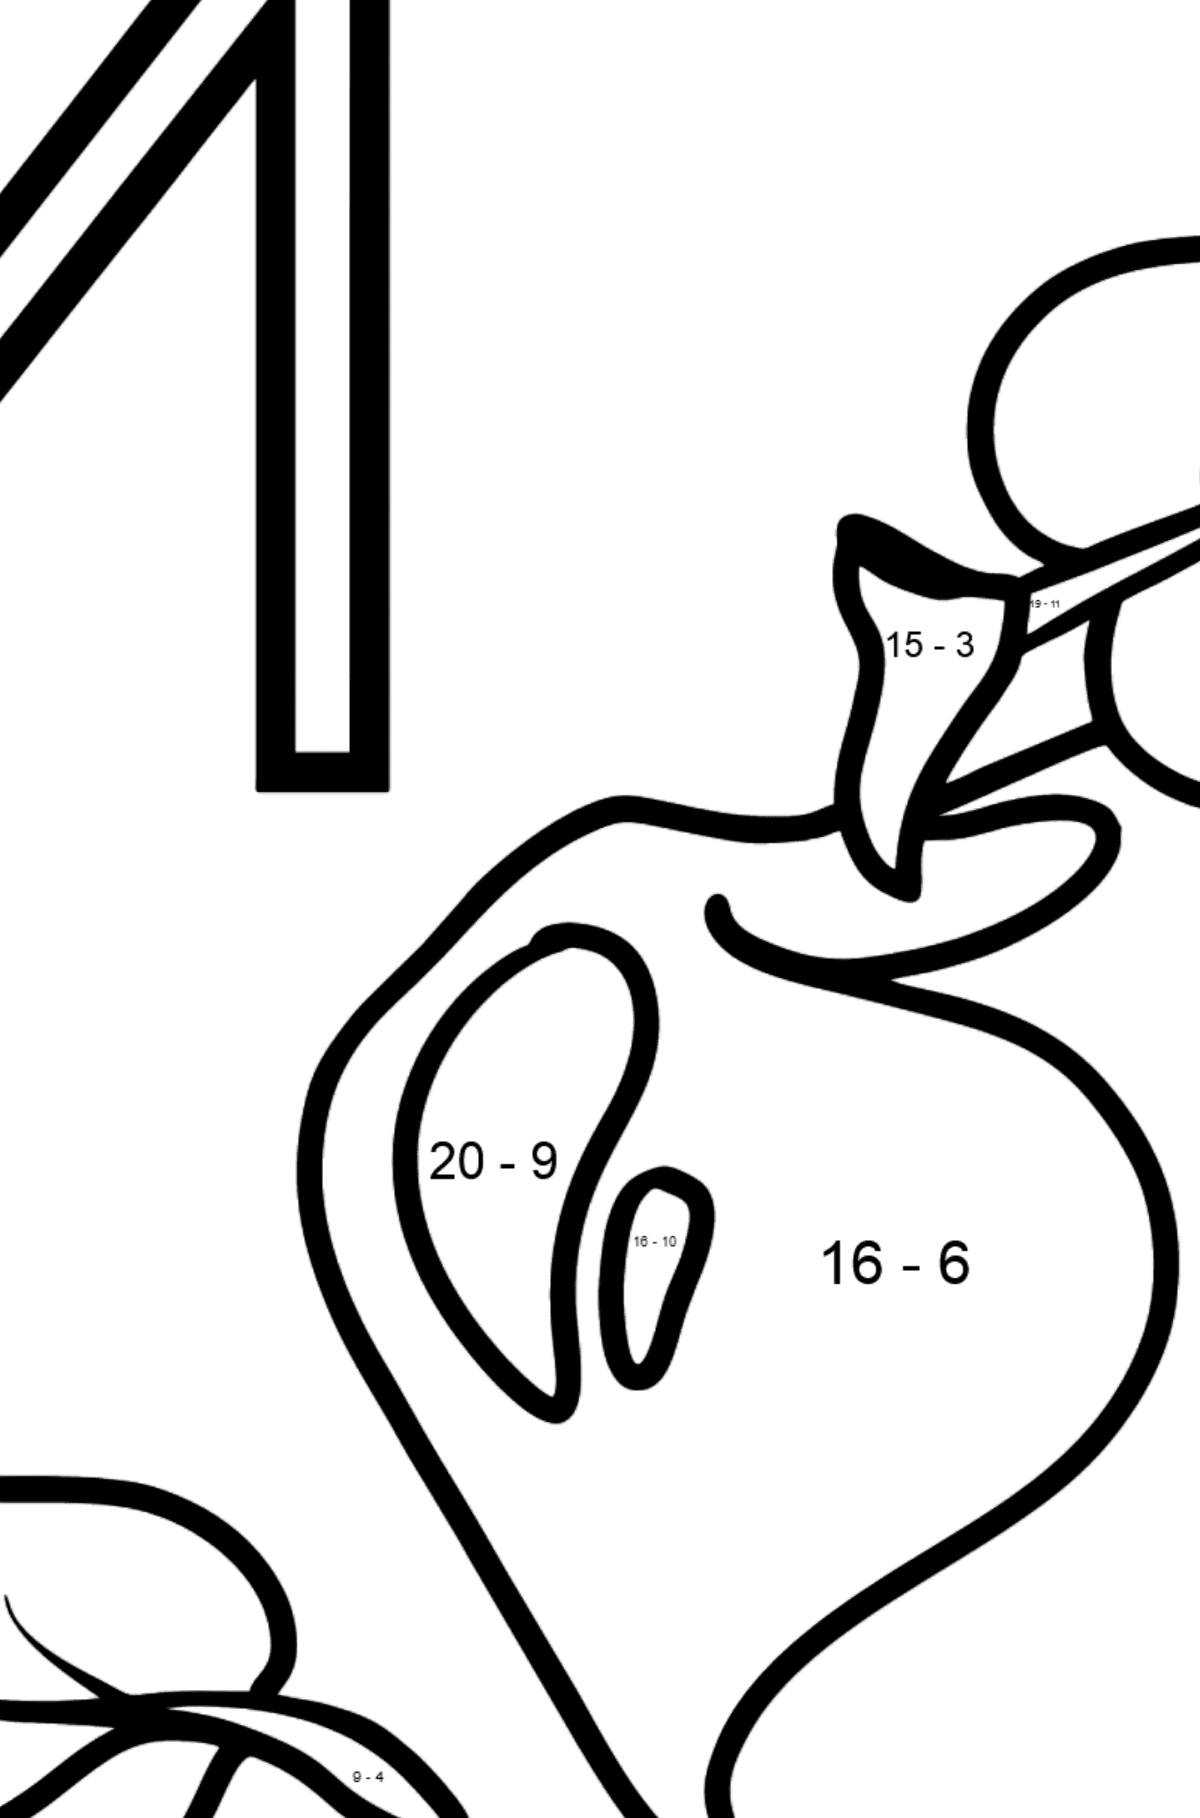 Spanish Letter M coloring pages - MANZANA - Math Coloring - Subtraction for Kids